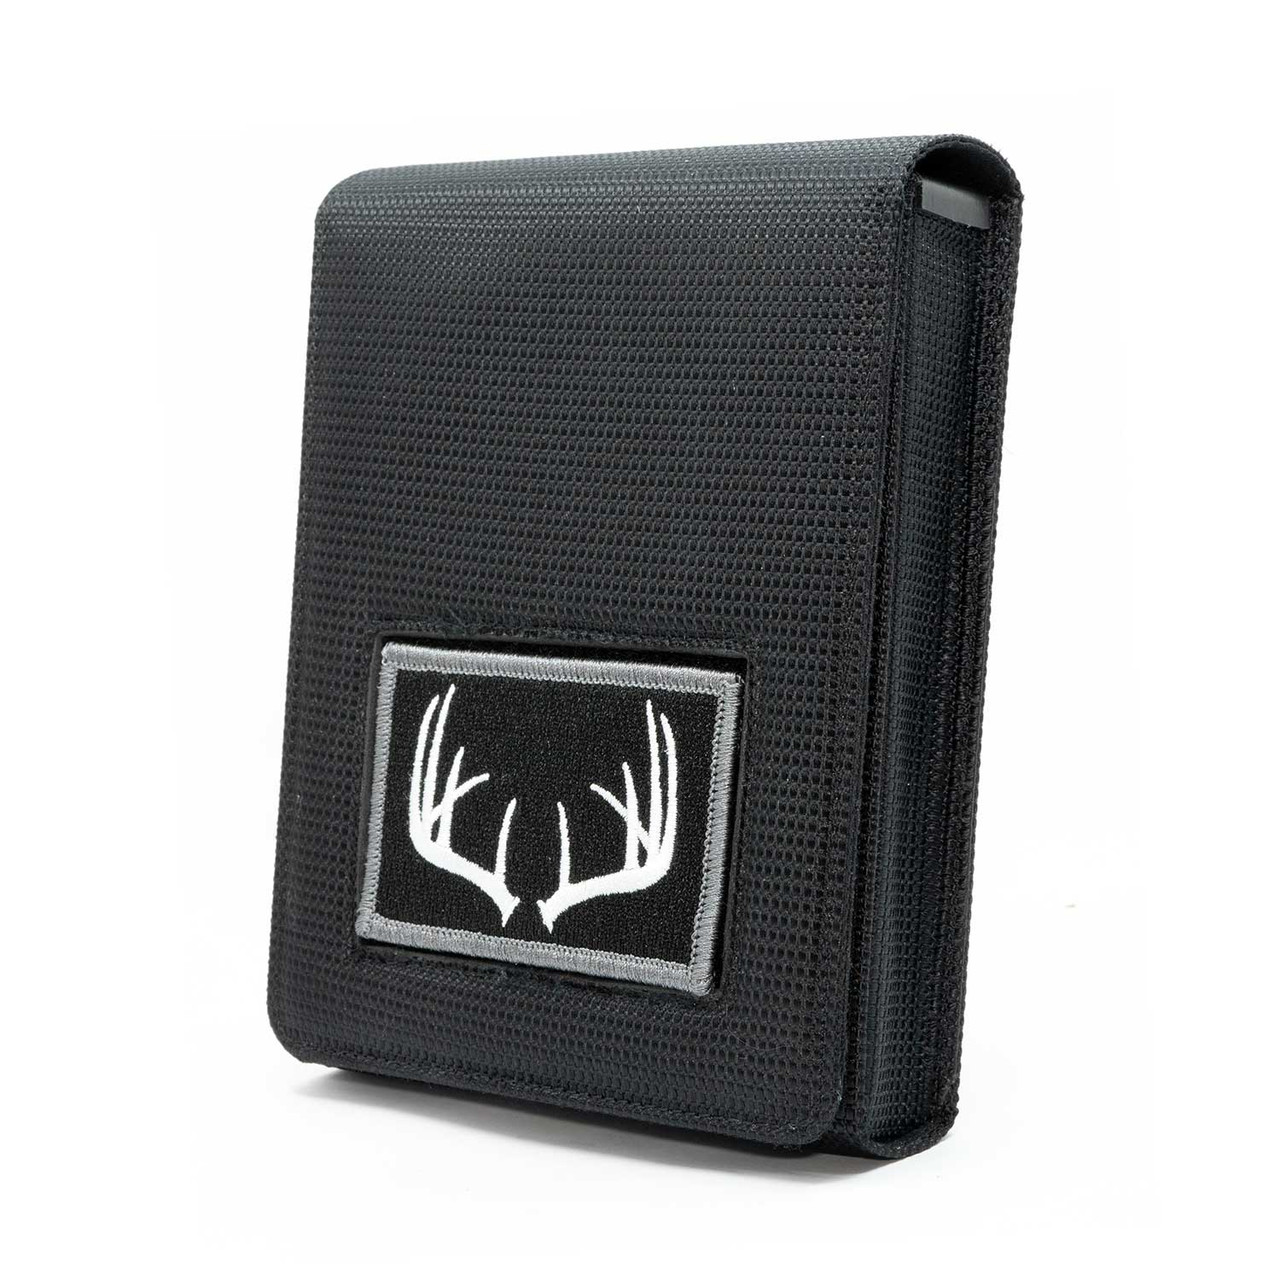 Antlers Tactical Patch